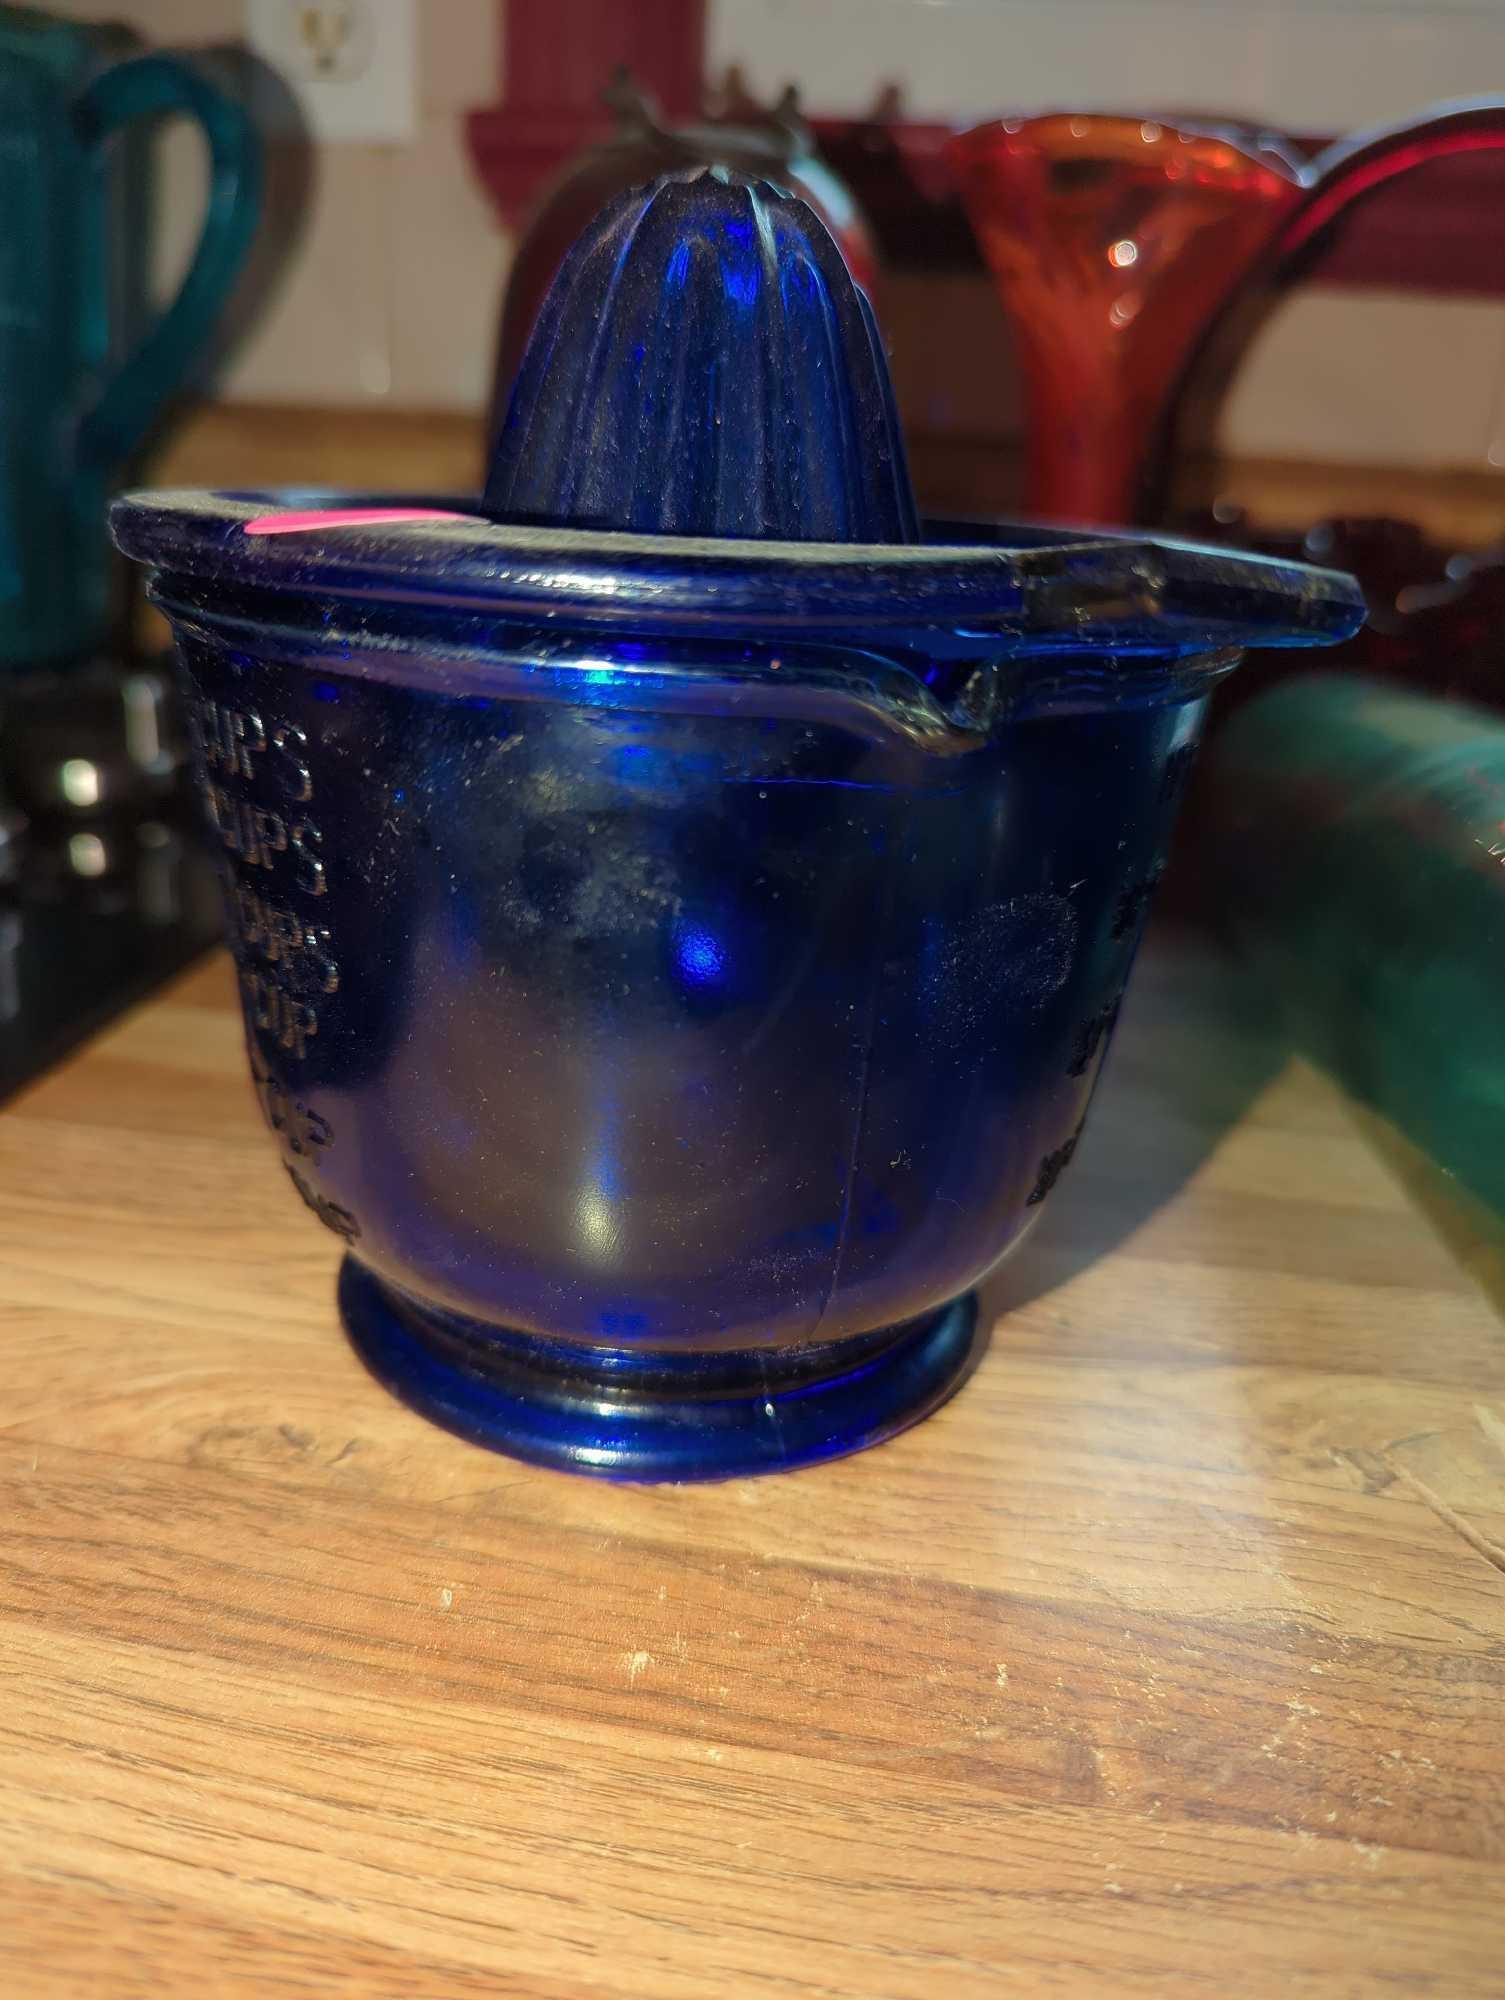 (KIT) COBALT BLUE GLASS JUICER REAMER GRADUATED MEASURING CUP, MEASURE APPROXIMATELY 5 IN X 5.5 IN,